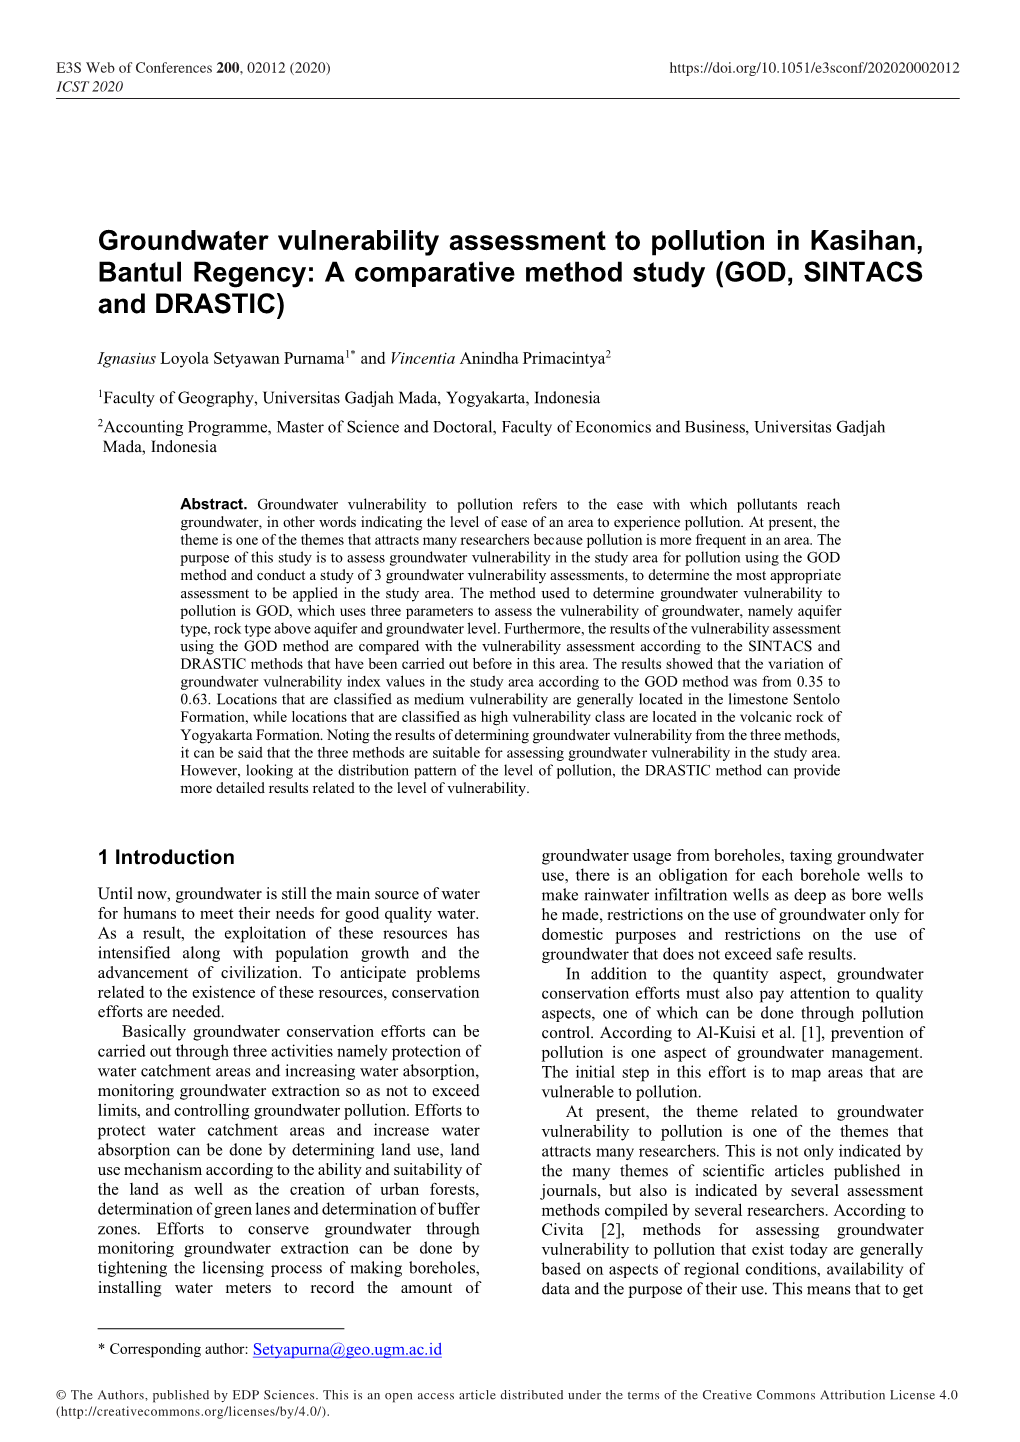 Groundwater Vulnerability Assessment to Pollution in Kasihan, Bantul Regency: a Comparative Method Study (GOD, SINTACS and DRASTIC)